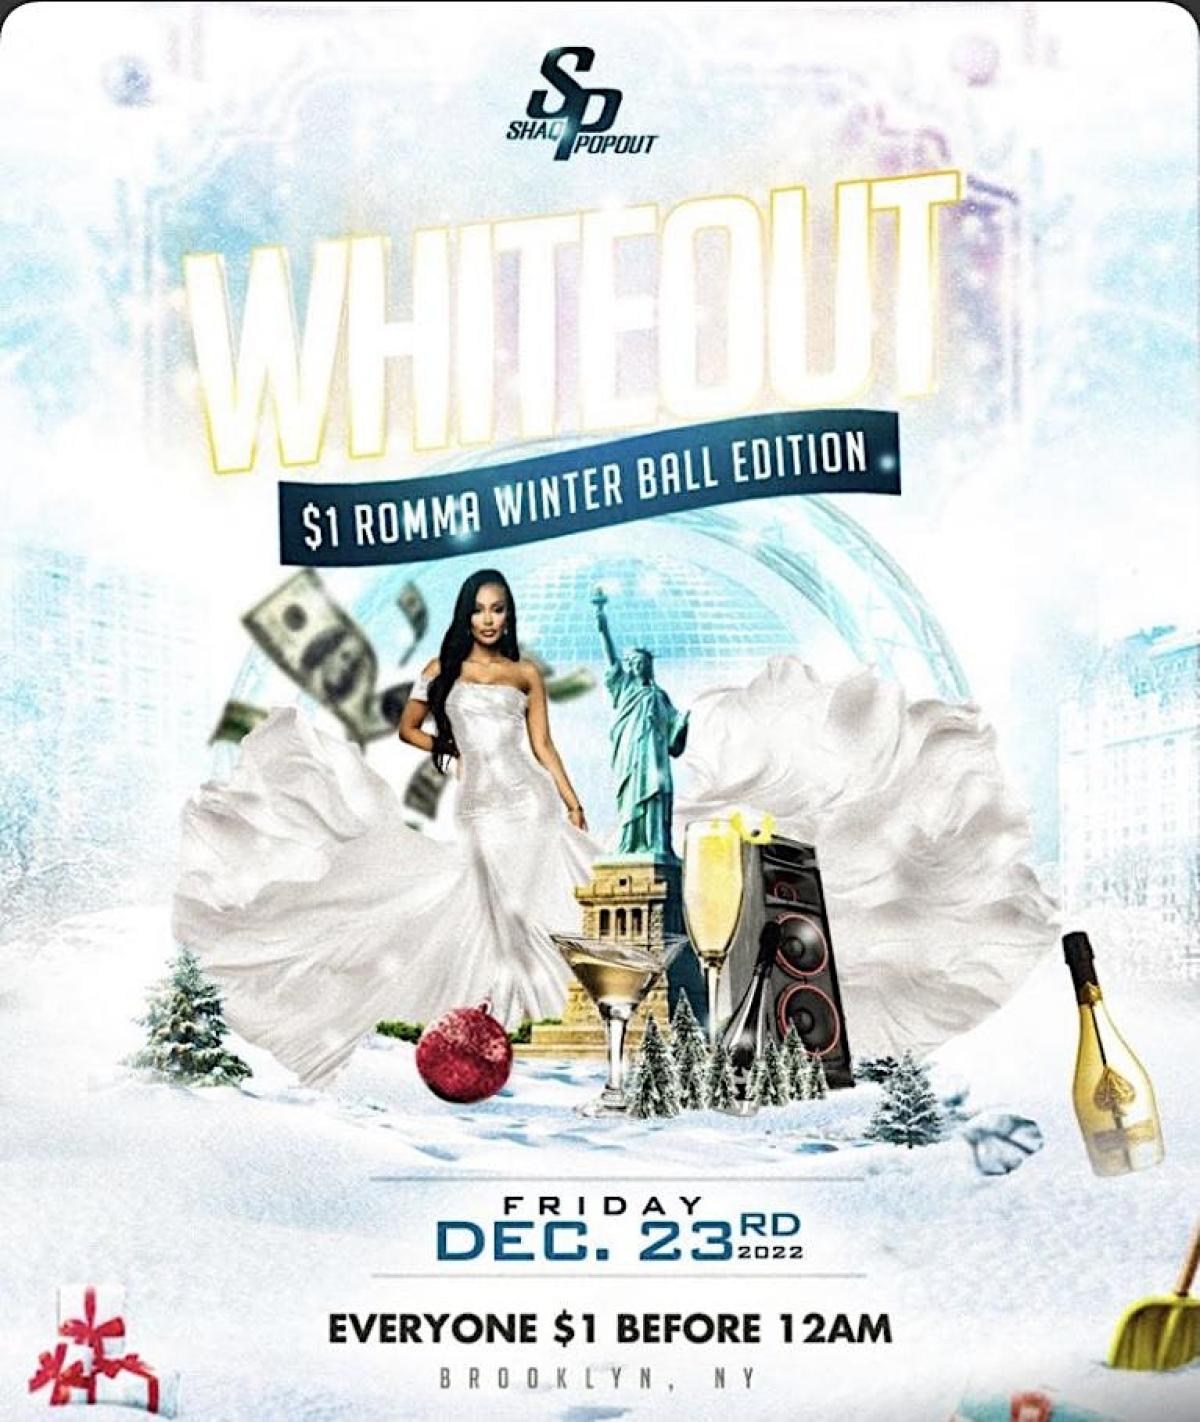 Whiteout: $1 Winter Edition flyer or graphic.